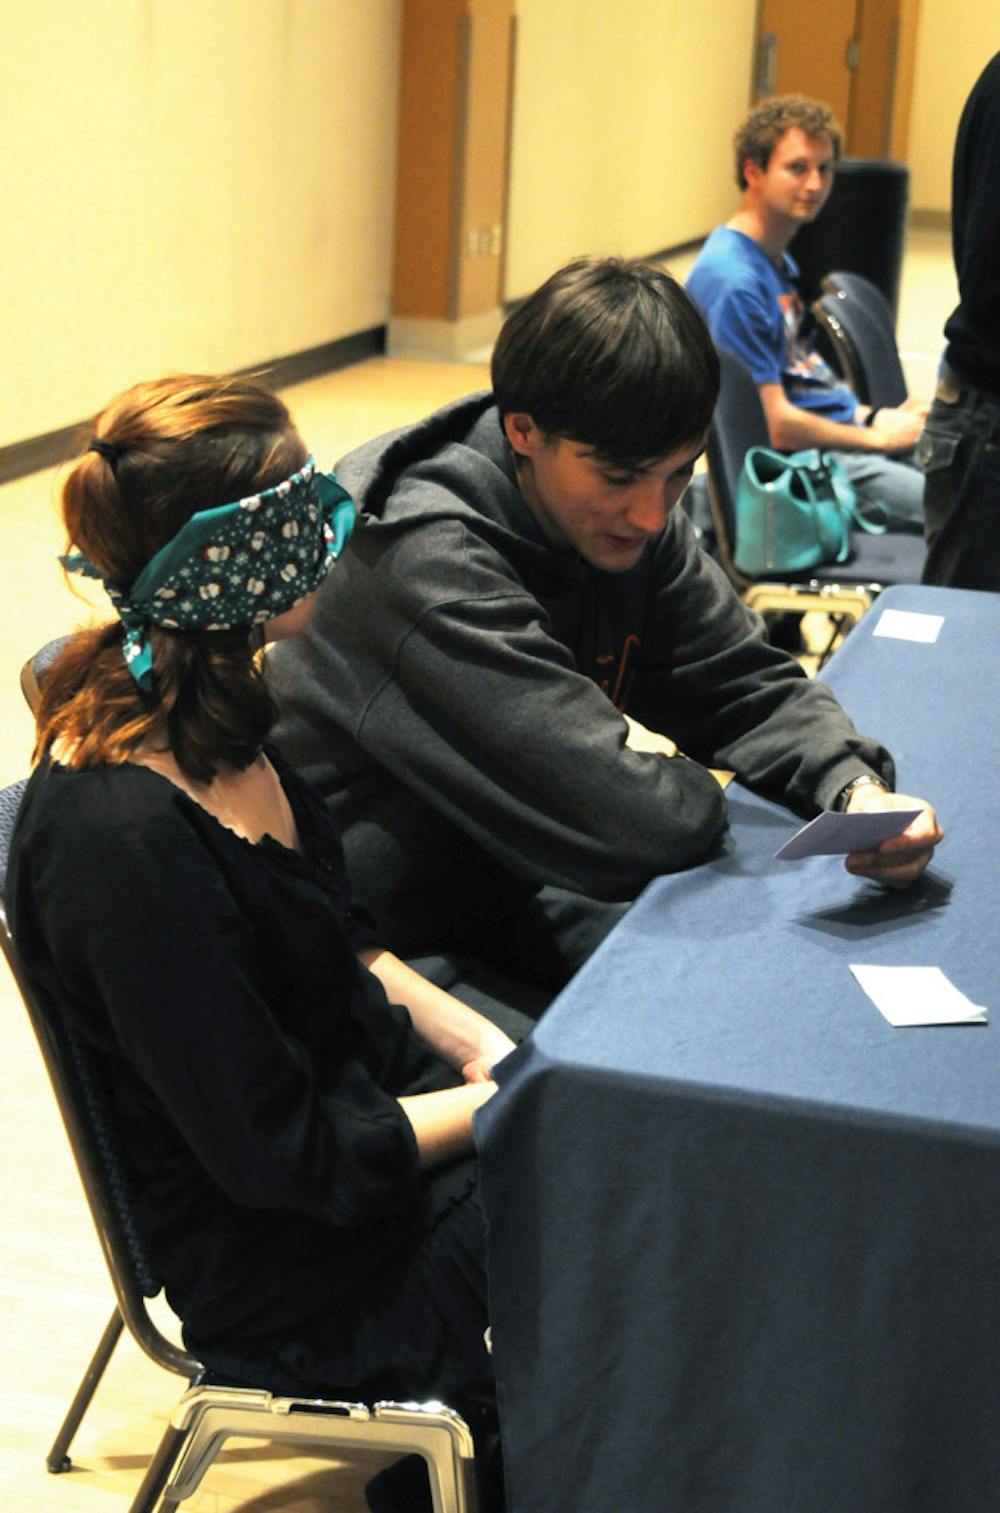 <p>UF materials science and engineering junior Matt Wener, 21, wears earplugs and assists UF English senior Constance Hackler, 20, who wears a blindfold as part of the Dining with Disabilities event in the Reitz Union Rion Ballroom on Monday evening. Participants were challenged with an assigned disability to gain a better understanding of others’ lifestyles.</p>